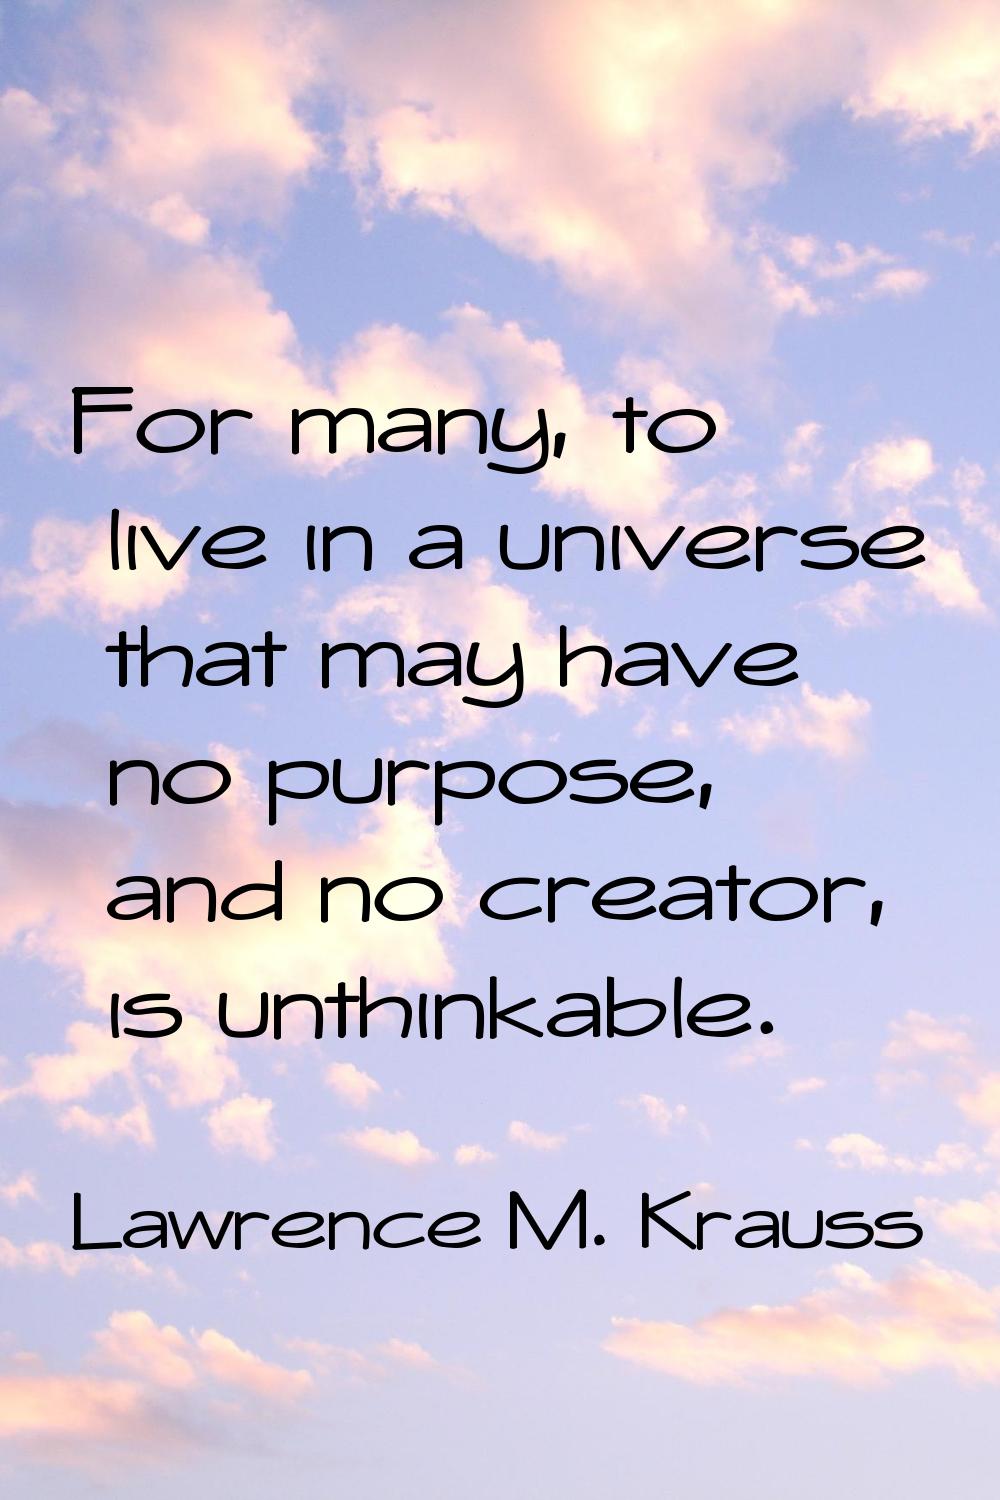 For many, to live in a universe that may have no purpose, and no creator, is unthinkable.